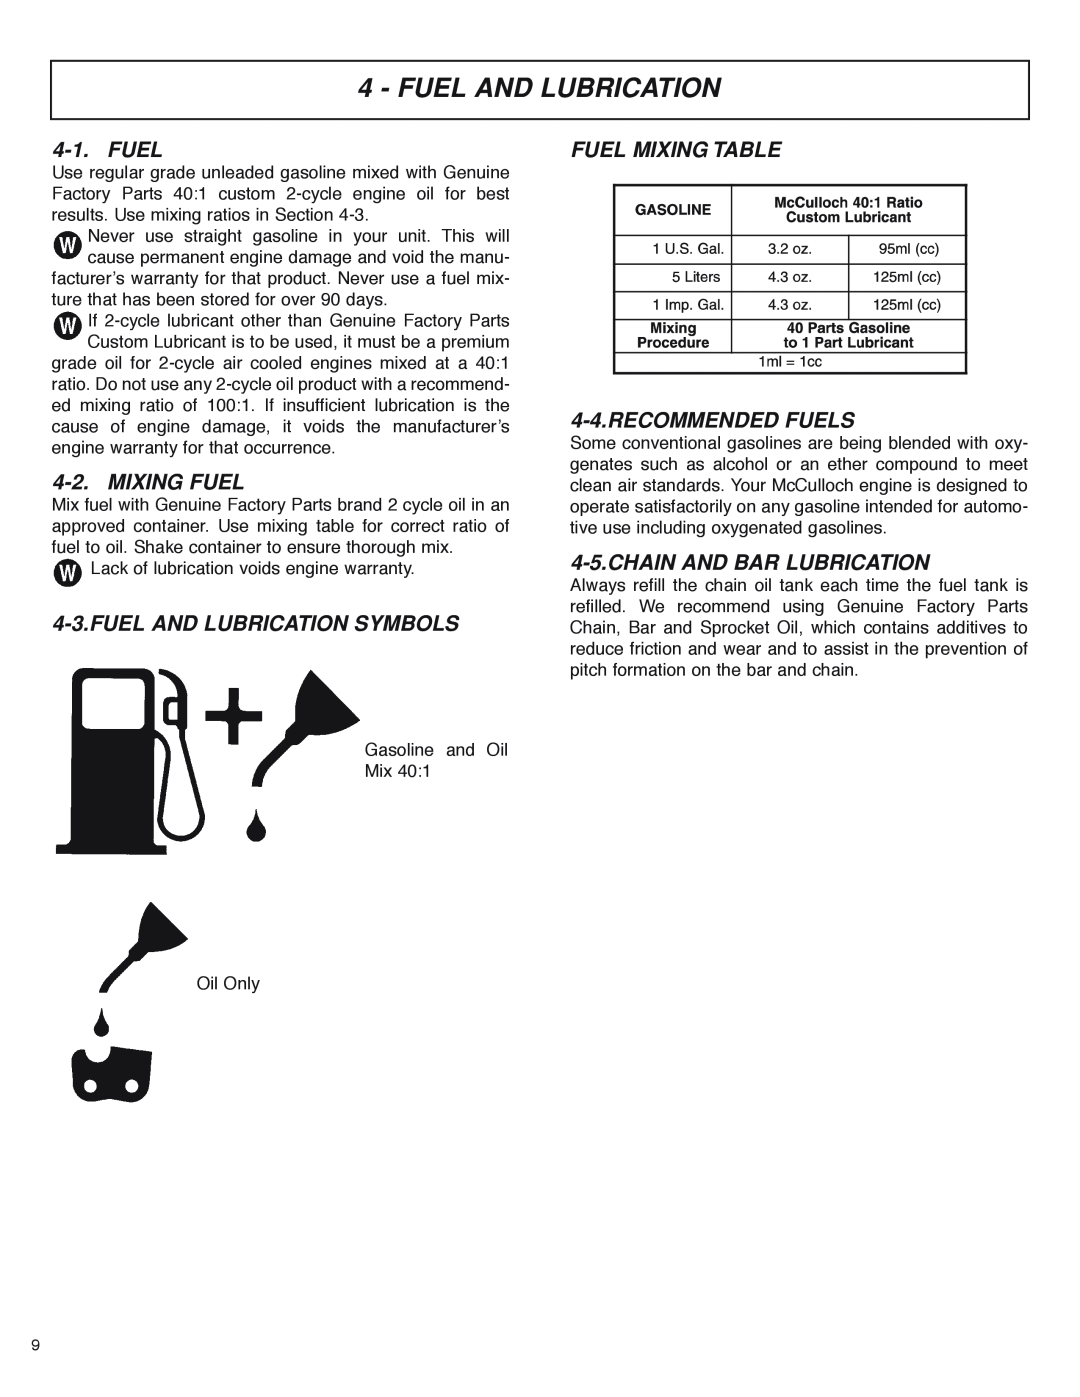 McCulloch MS4016PAVCC, MS4018PAVCC Mixing Fuel, Fuel And Lubrication Symbols, FUEL MIXING -4.RECOMMENDED FUELS 